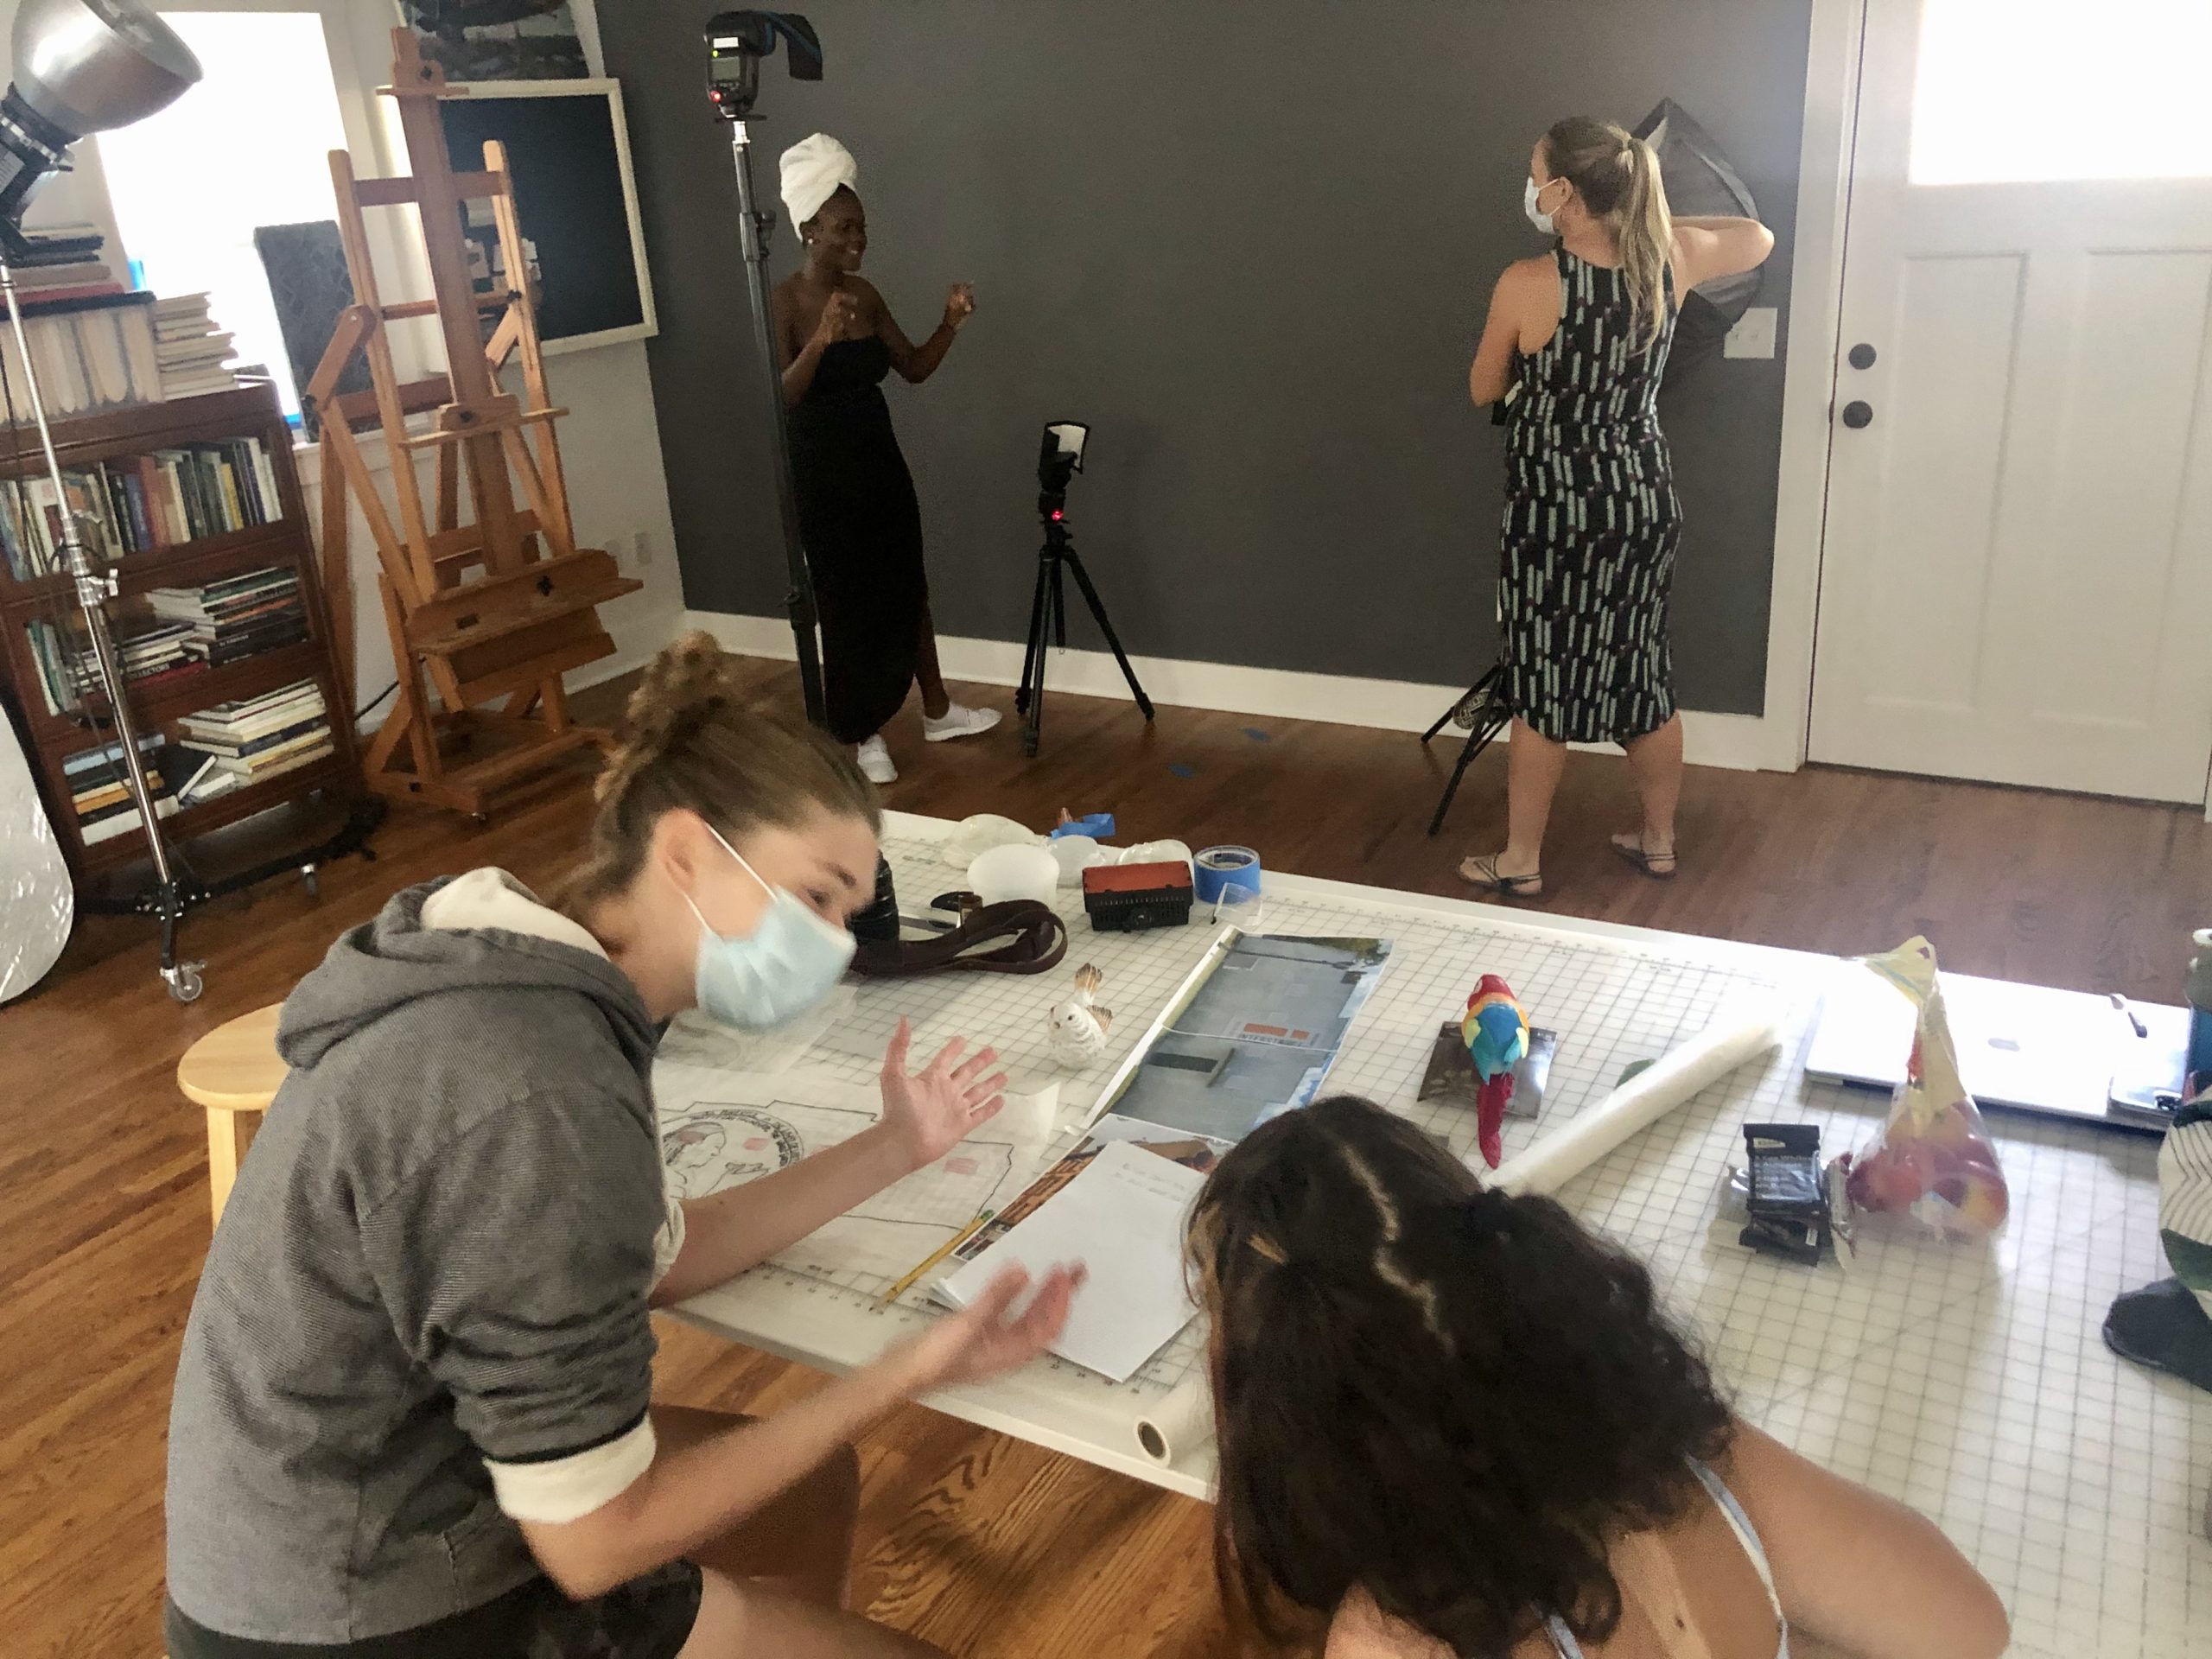 Two women looking at designs on drafting table with two women in the background with photography equipment